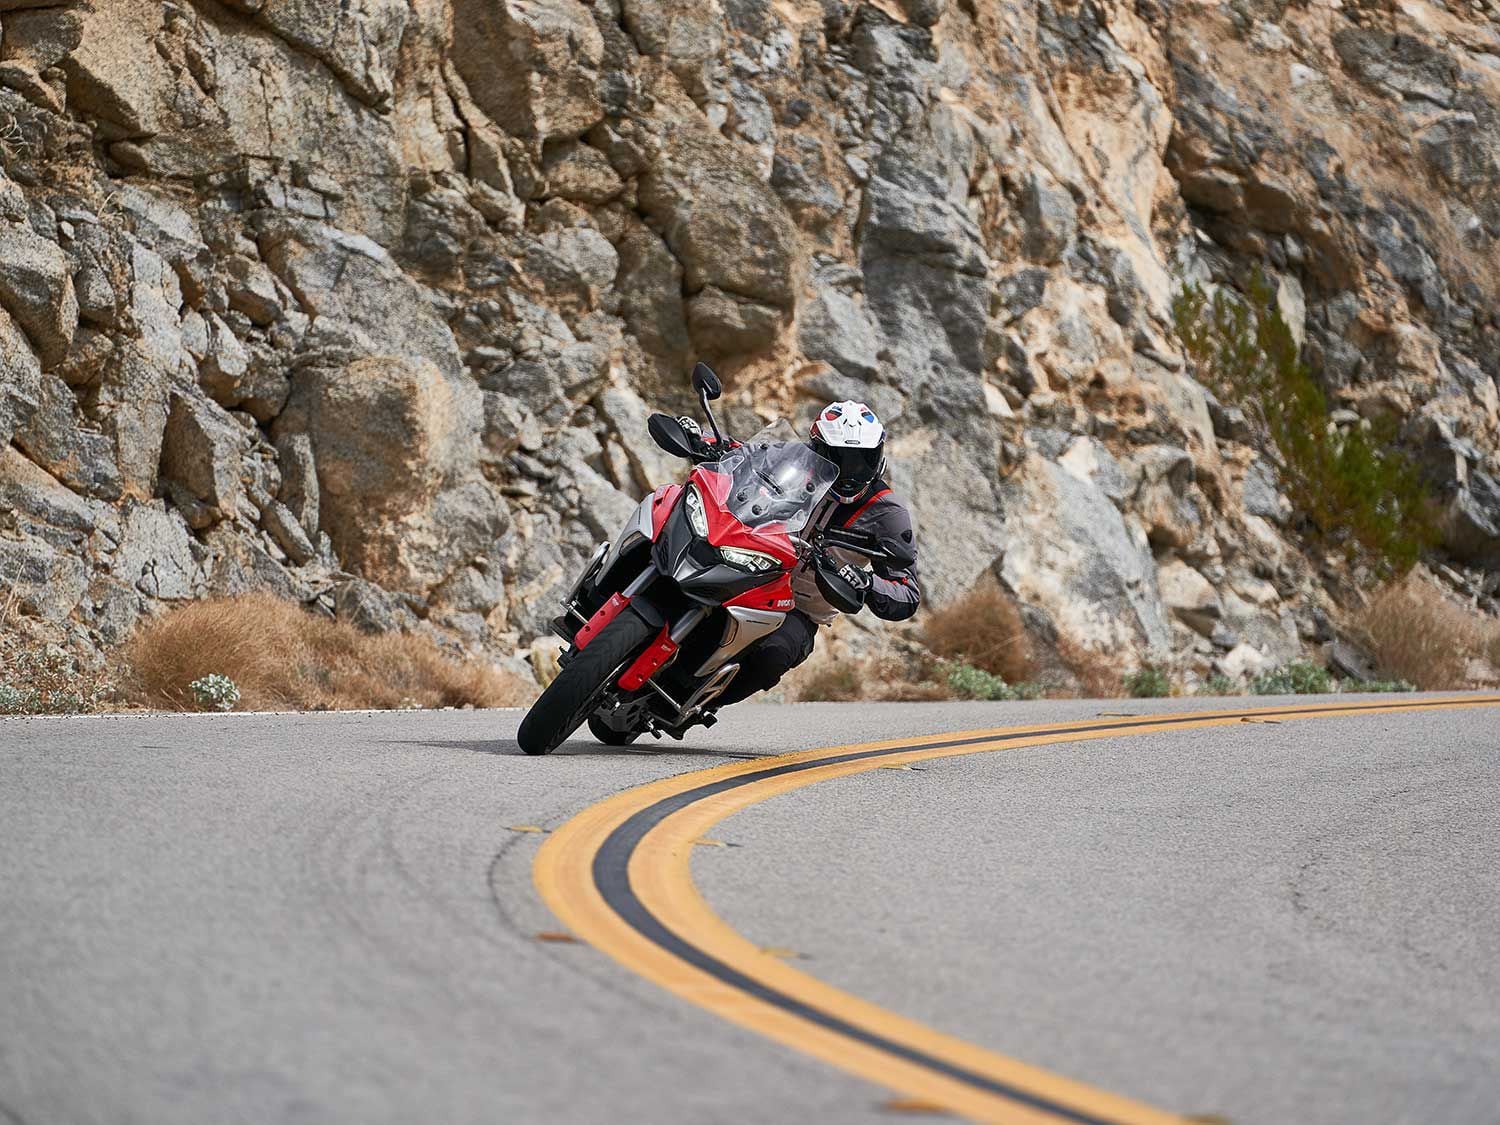 In typical Ducati form, the Multistrada has an astounding level of sport-appeal. Even with the larger diameter front hoop, its road handling remains dreamy.